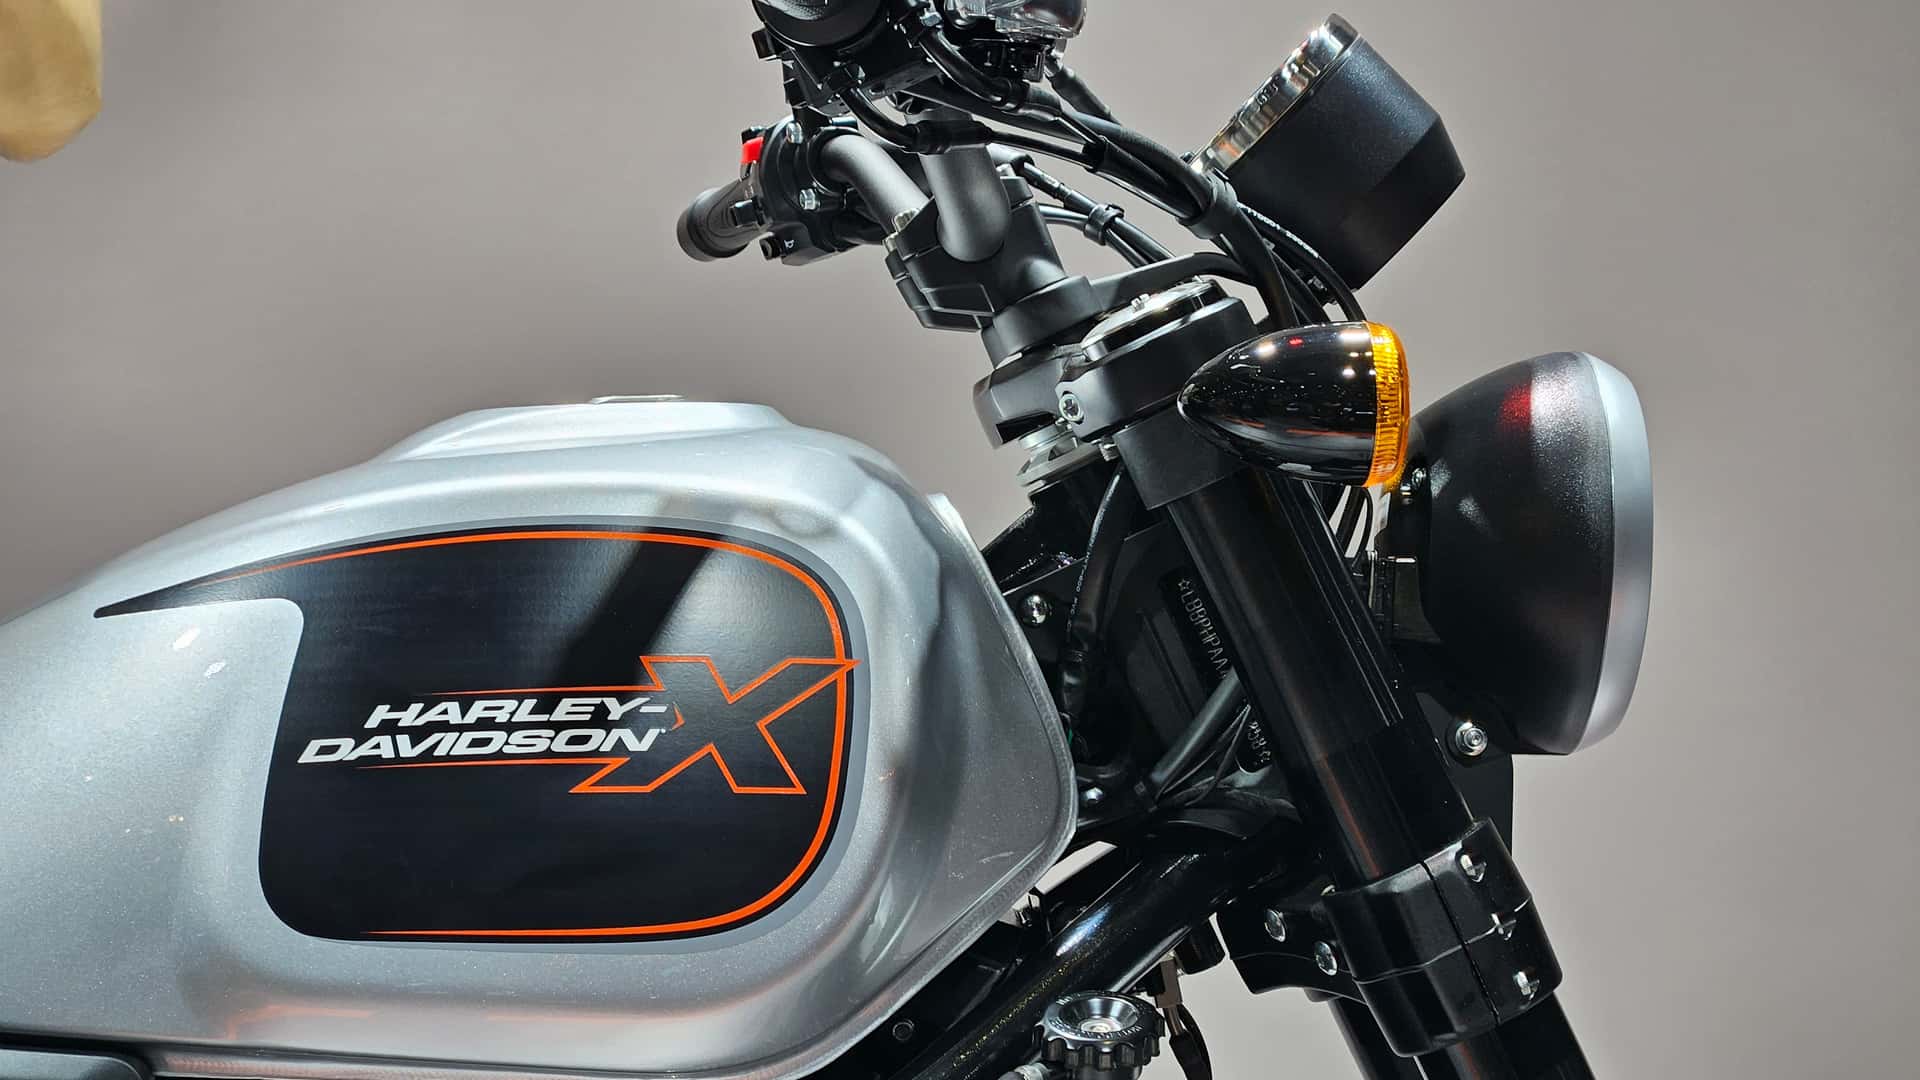 Live Photos of New Harley-Davidson X500 Cruiser Motorcycle - view